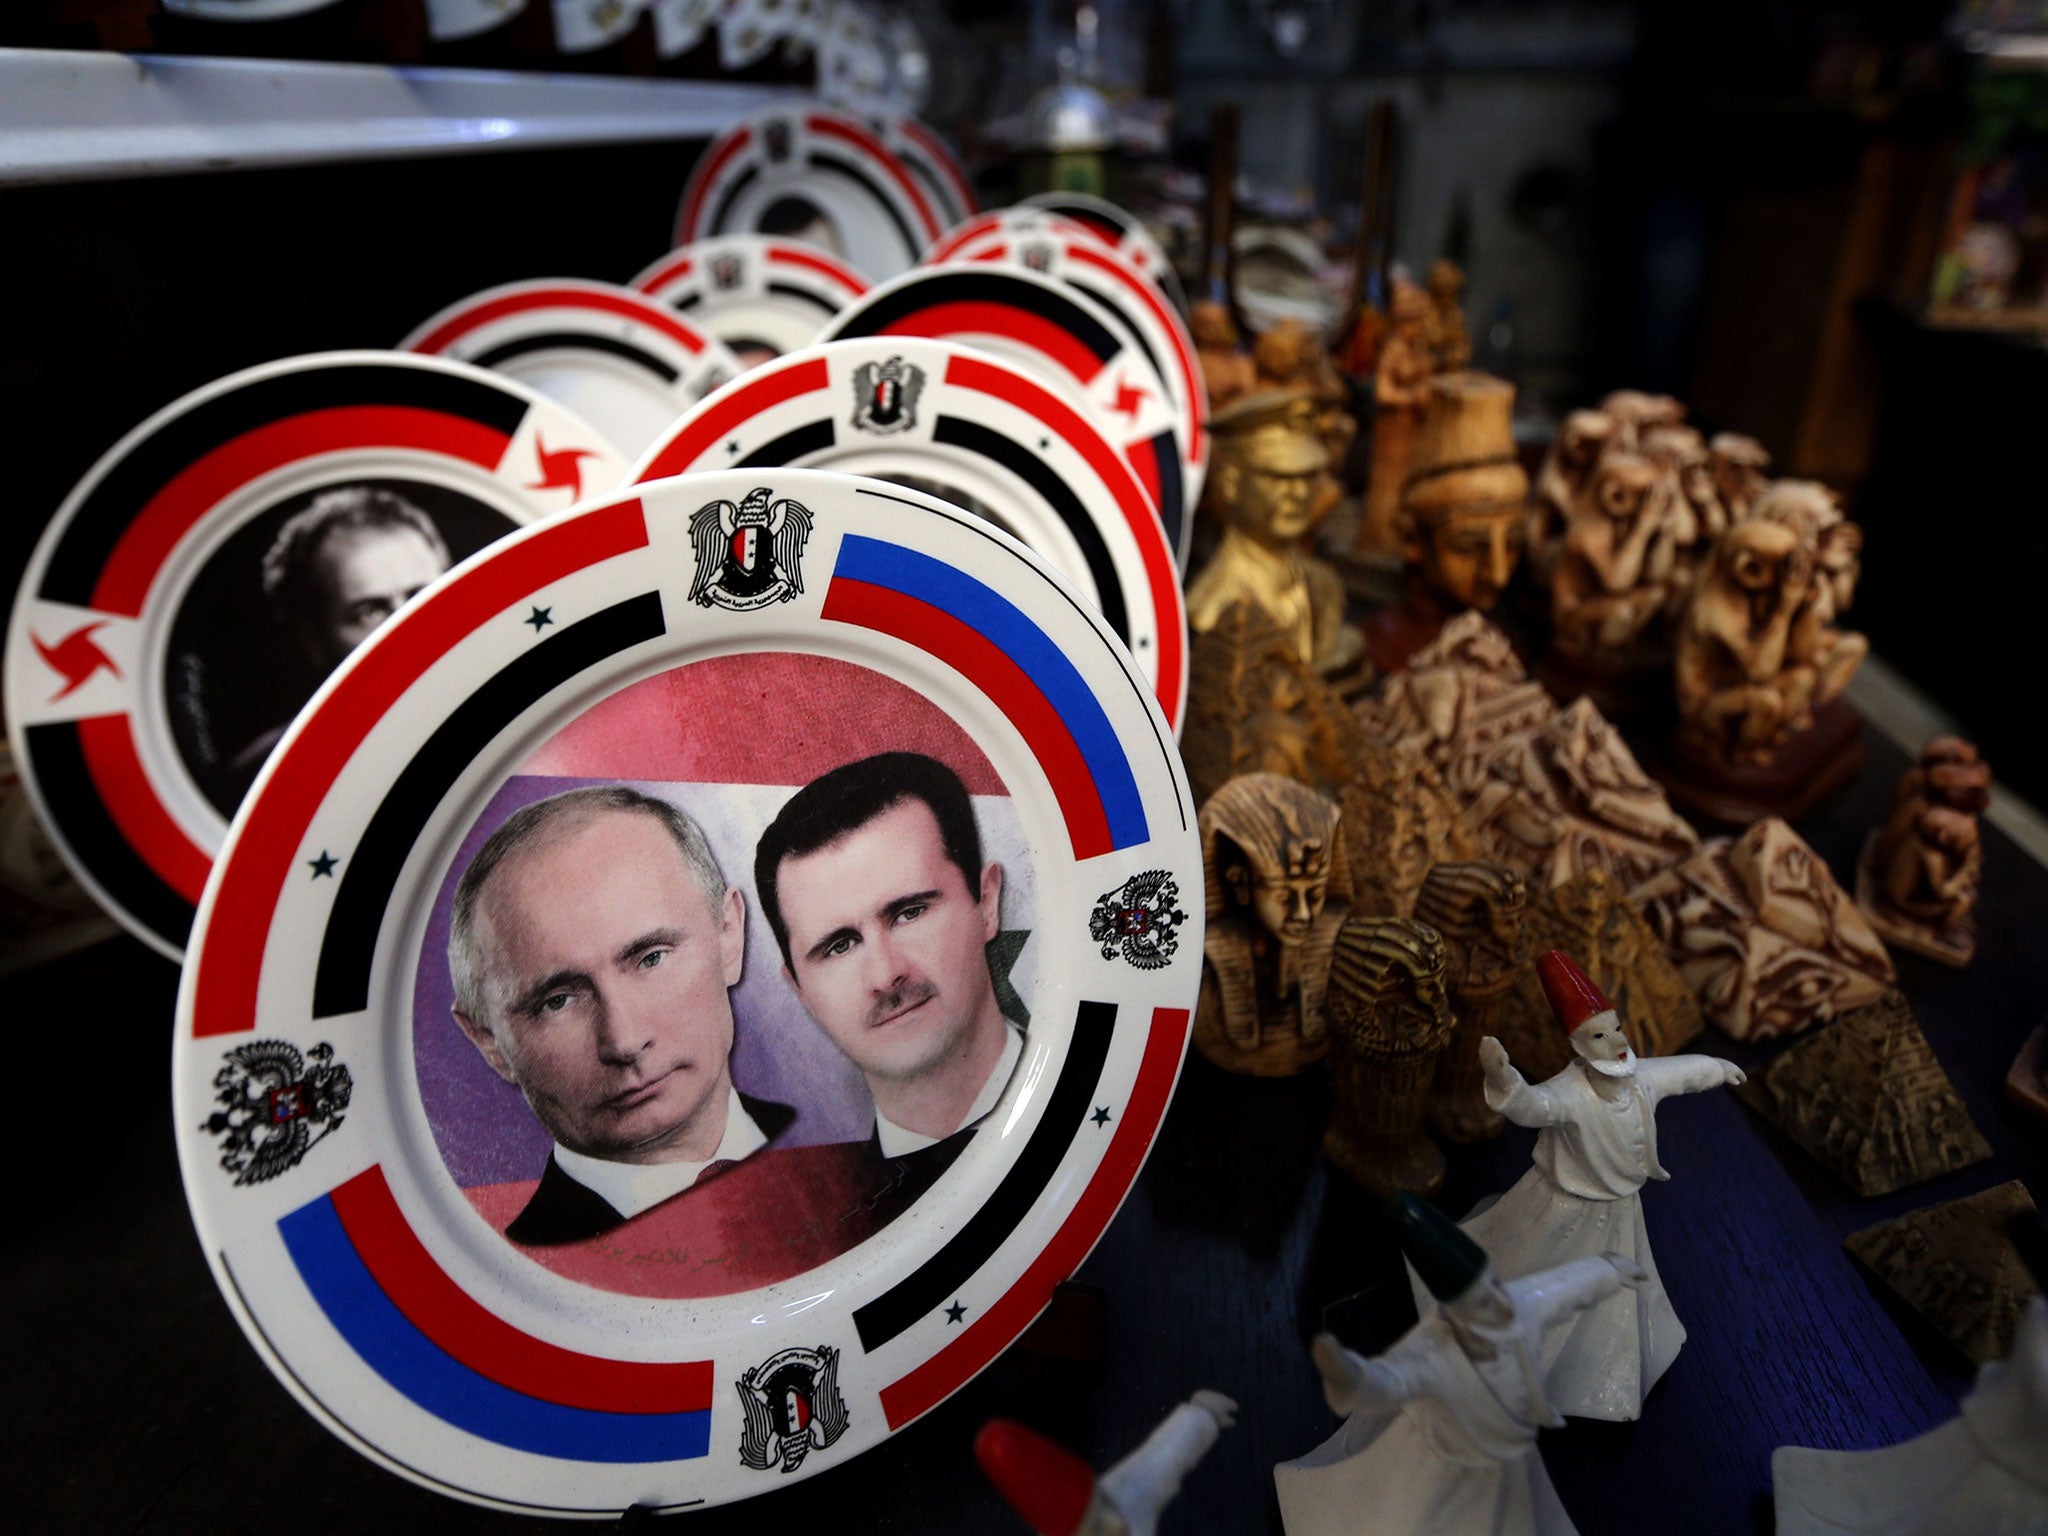 Porcelain plates bearing portraits of Syrian President Bashar al-Assad, right, and his Russian counterpart Vladimir Putin, left, are displayed at a handicrafts shop in the Syrian capital, Damascus